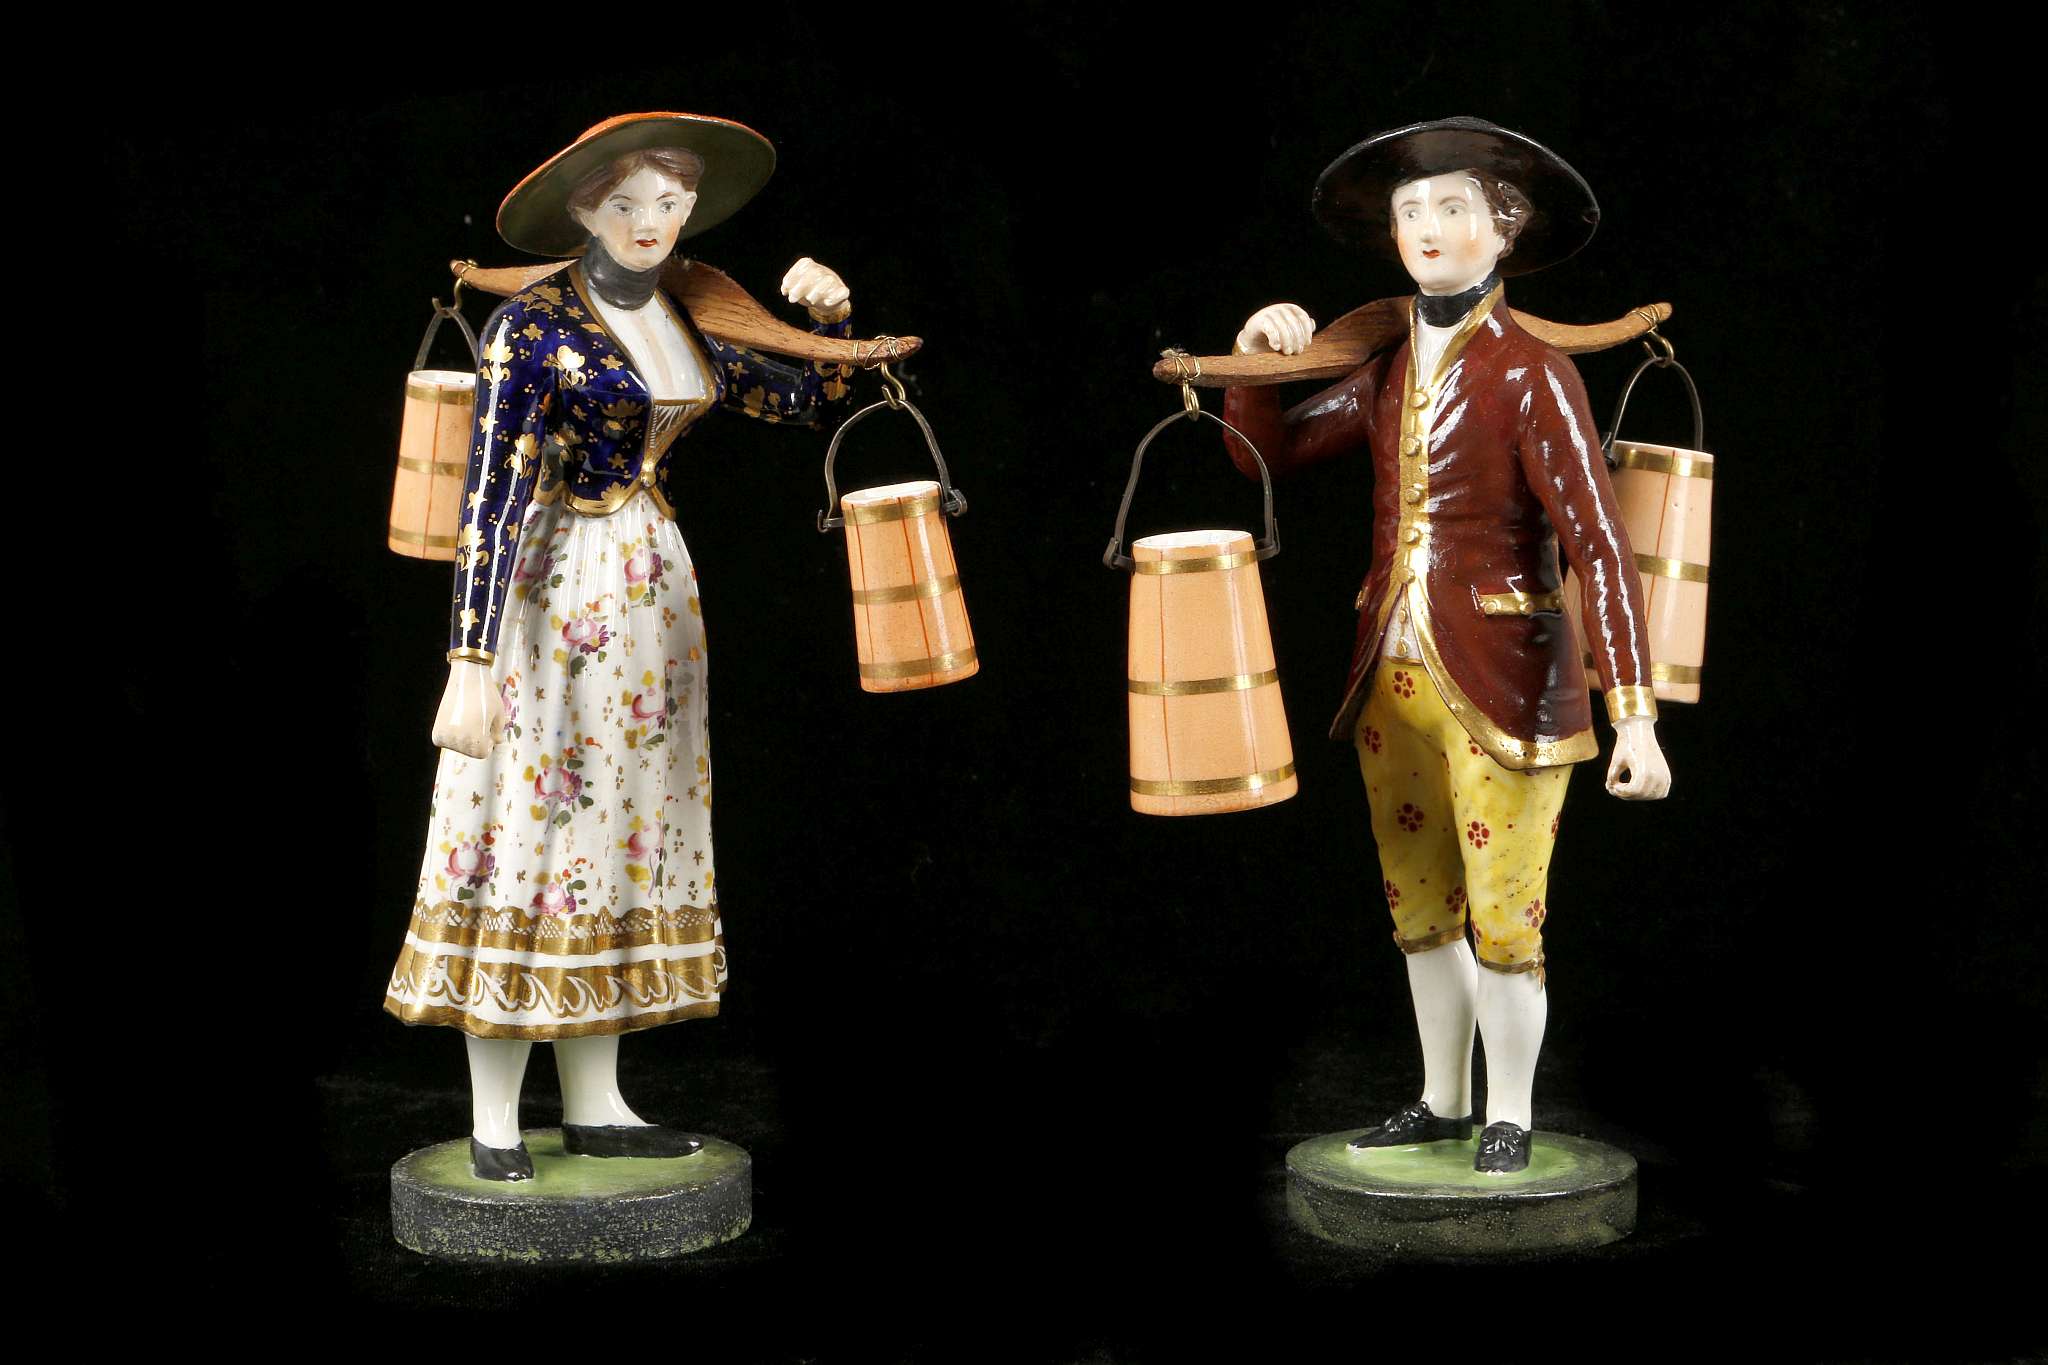 A PAIR OF DERBY FIGURES OF A MILKMAN AND MILKMAID, circa 1820, both modelled standing, carrying